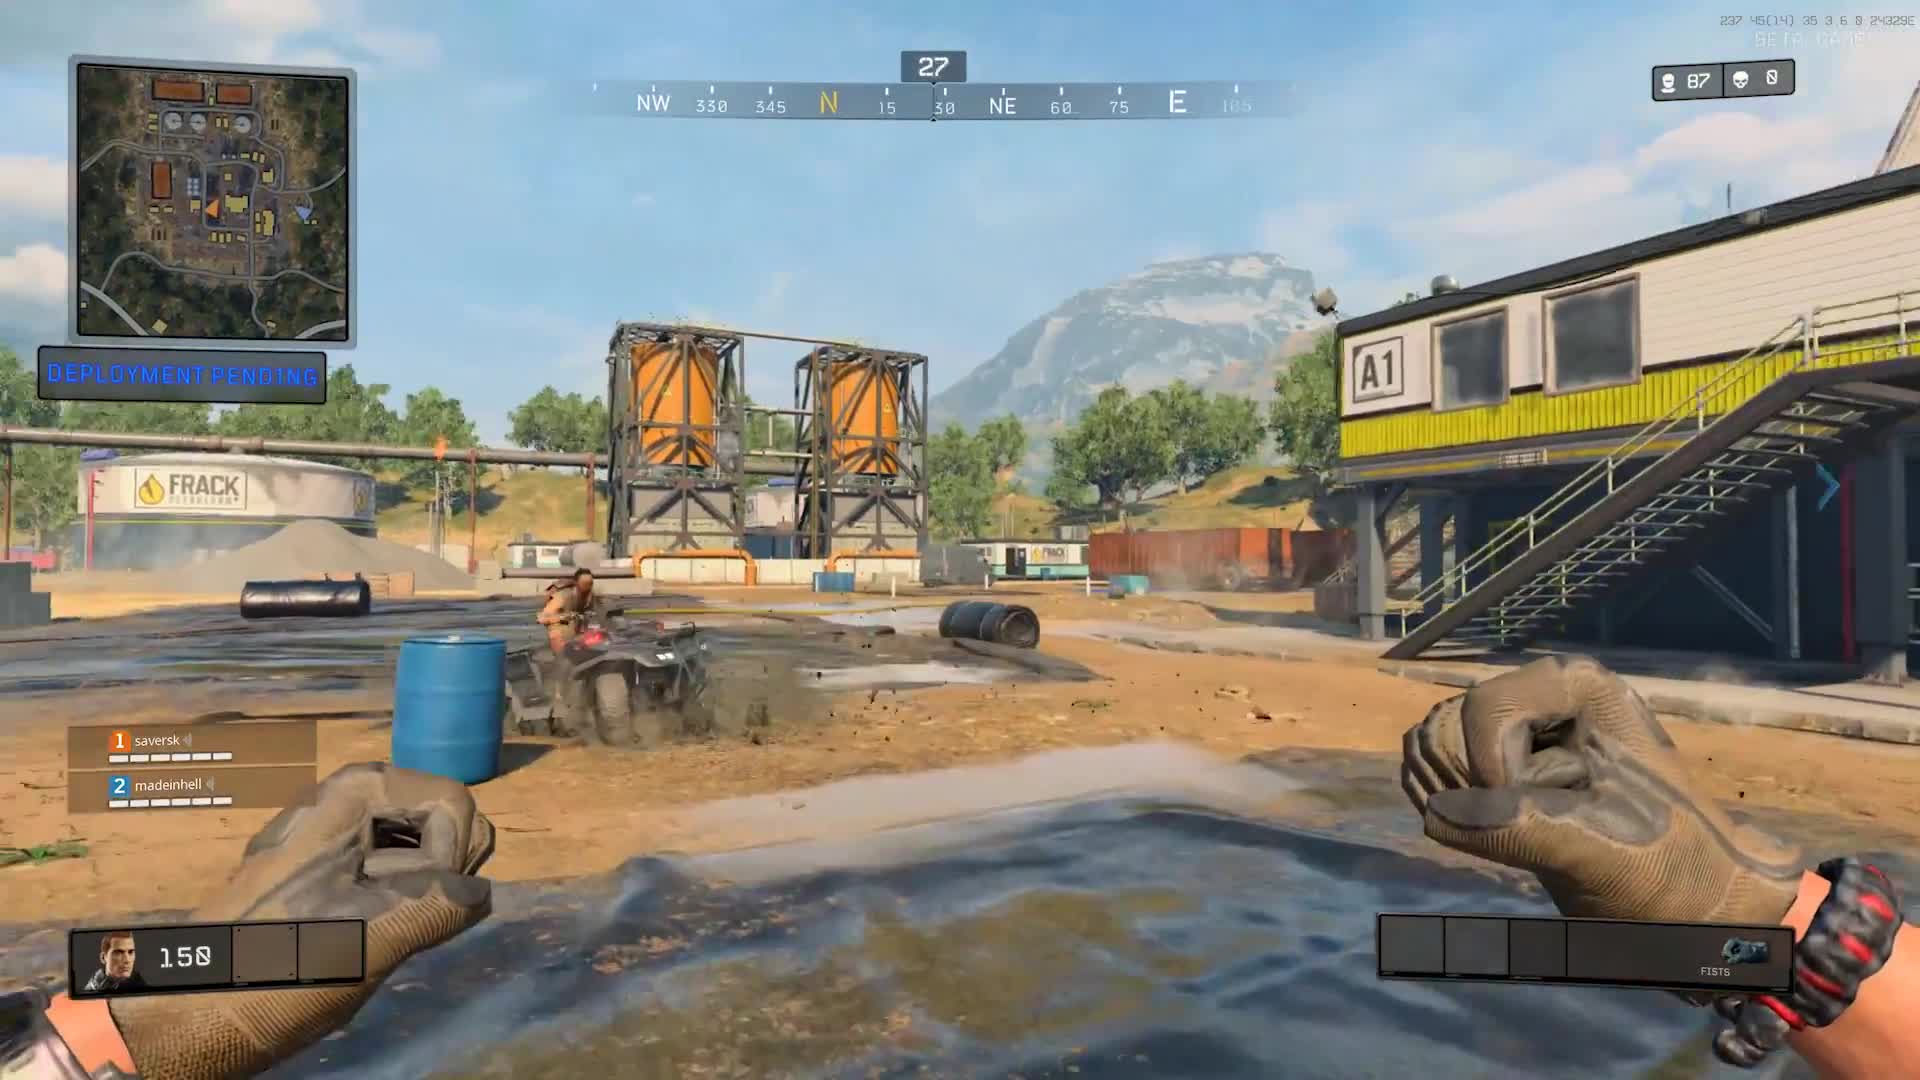 Call of Duty Black Ops 4 - Blackout Beta gameplay